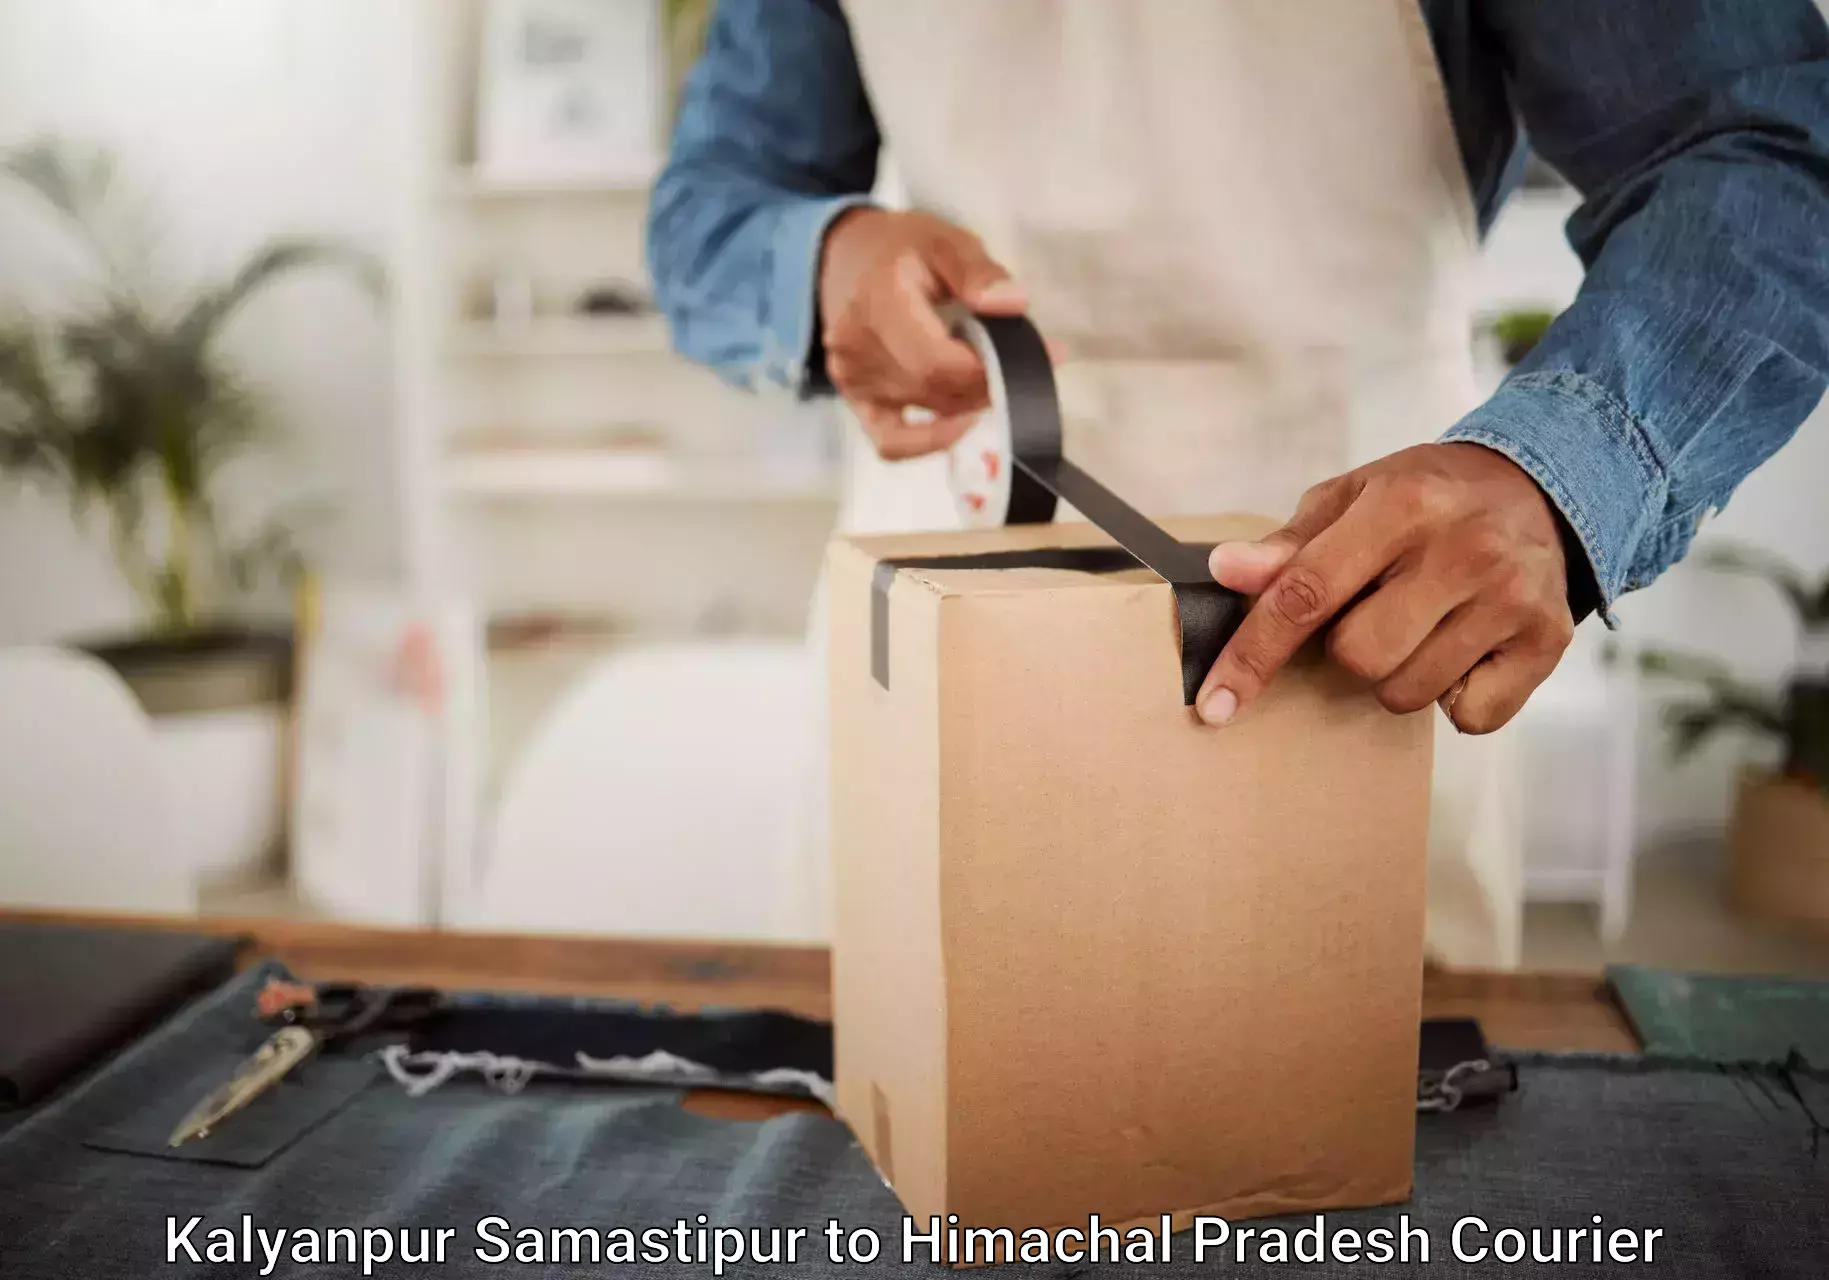 Luggage delivery operations Kalyanpur Samastipur to Una Himachal Pradesh